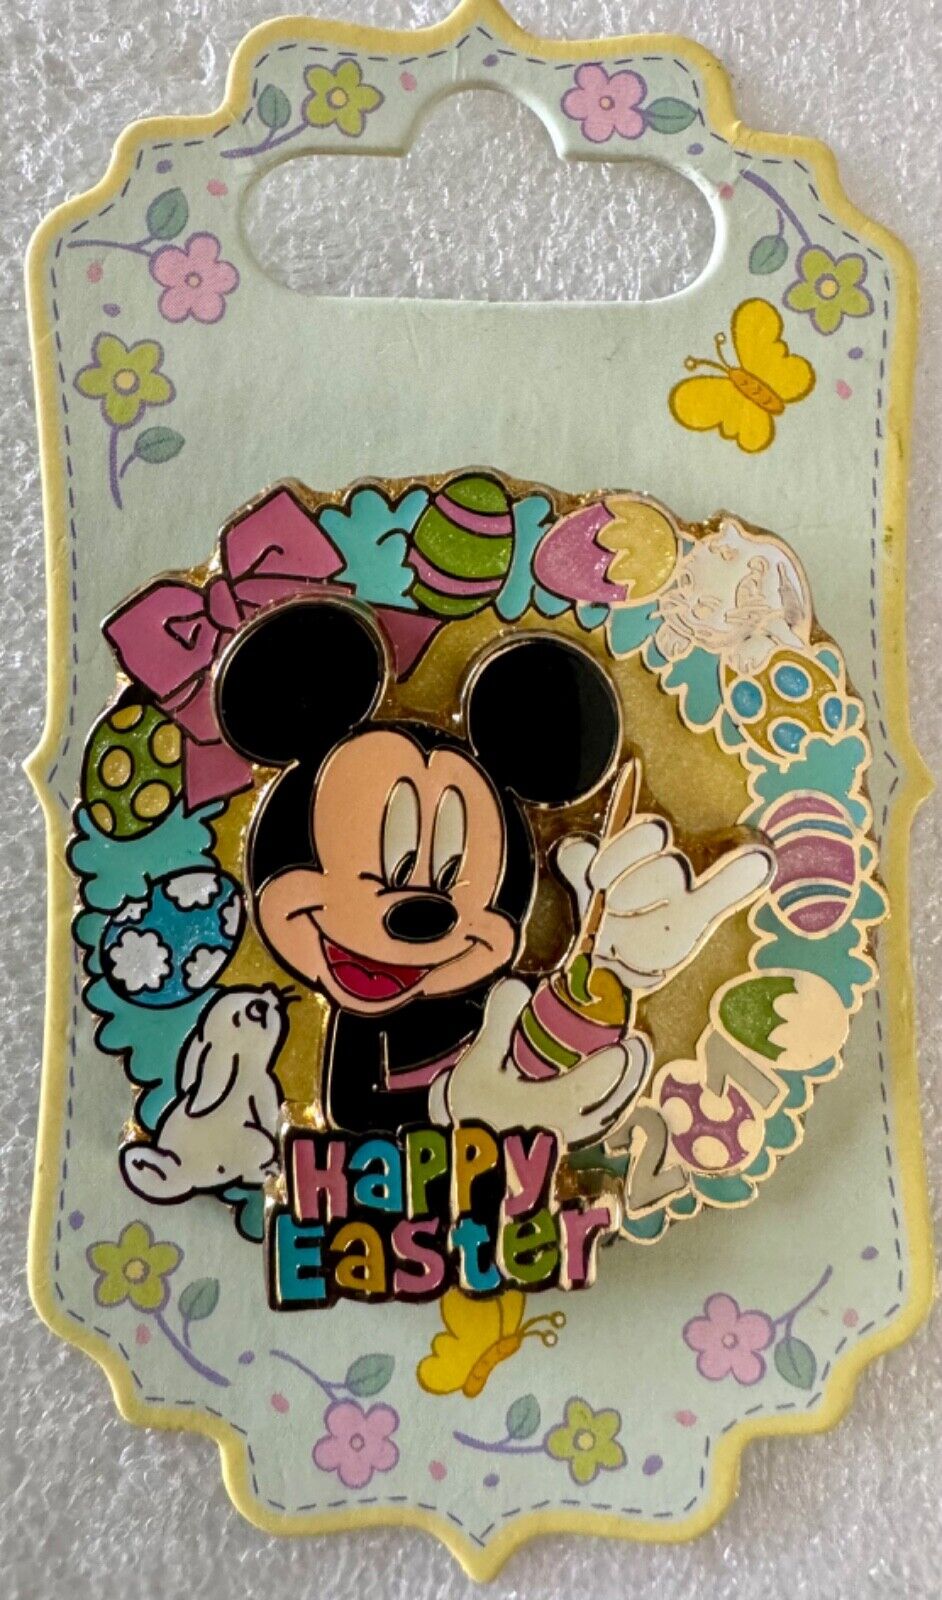 Disney Pin 75864 Mickey Mouse Happy Easter 2010 Series Limited Edition of 3000